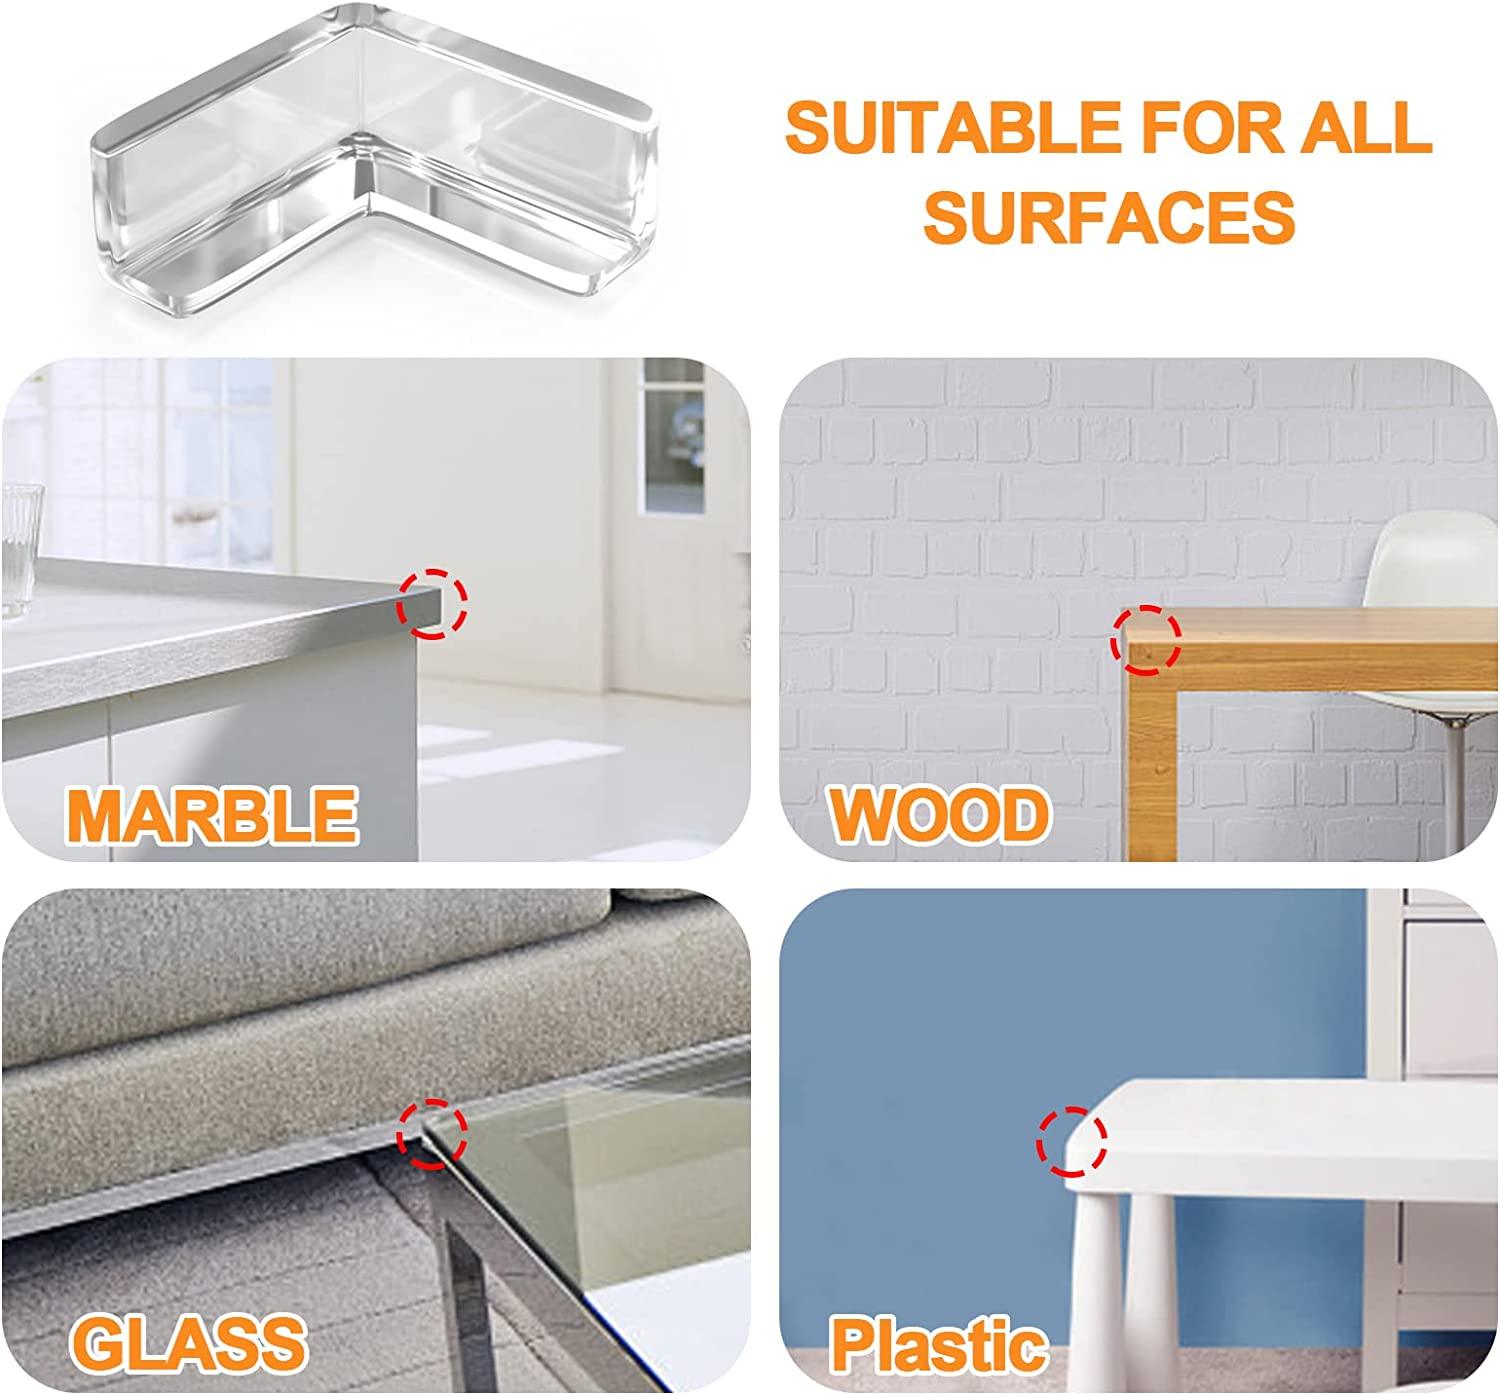 AIXMEET 8 Pack Corner Protector for Baby, Clear Furniture Corner Guard & Edge Safety Bumpers for Table Edges & Sharp Corners - Baby Proofing (L Shape)